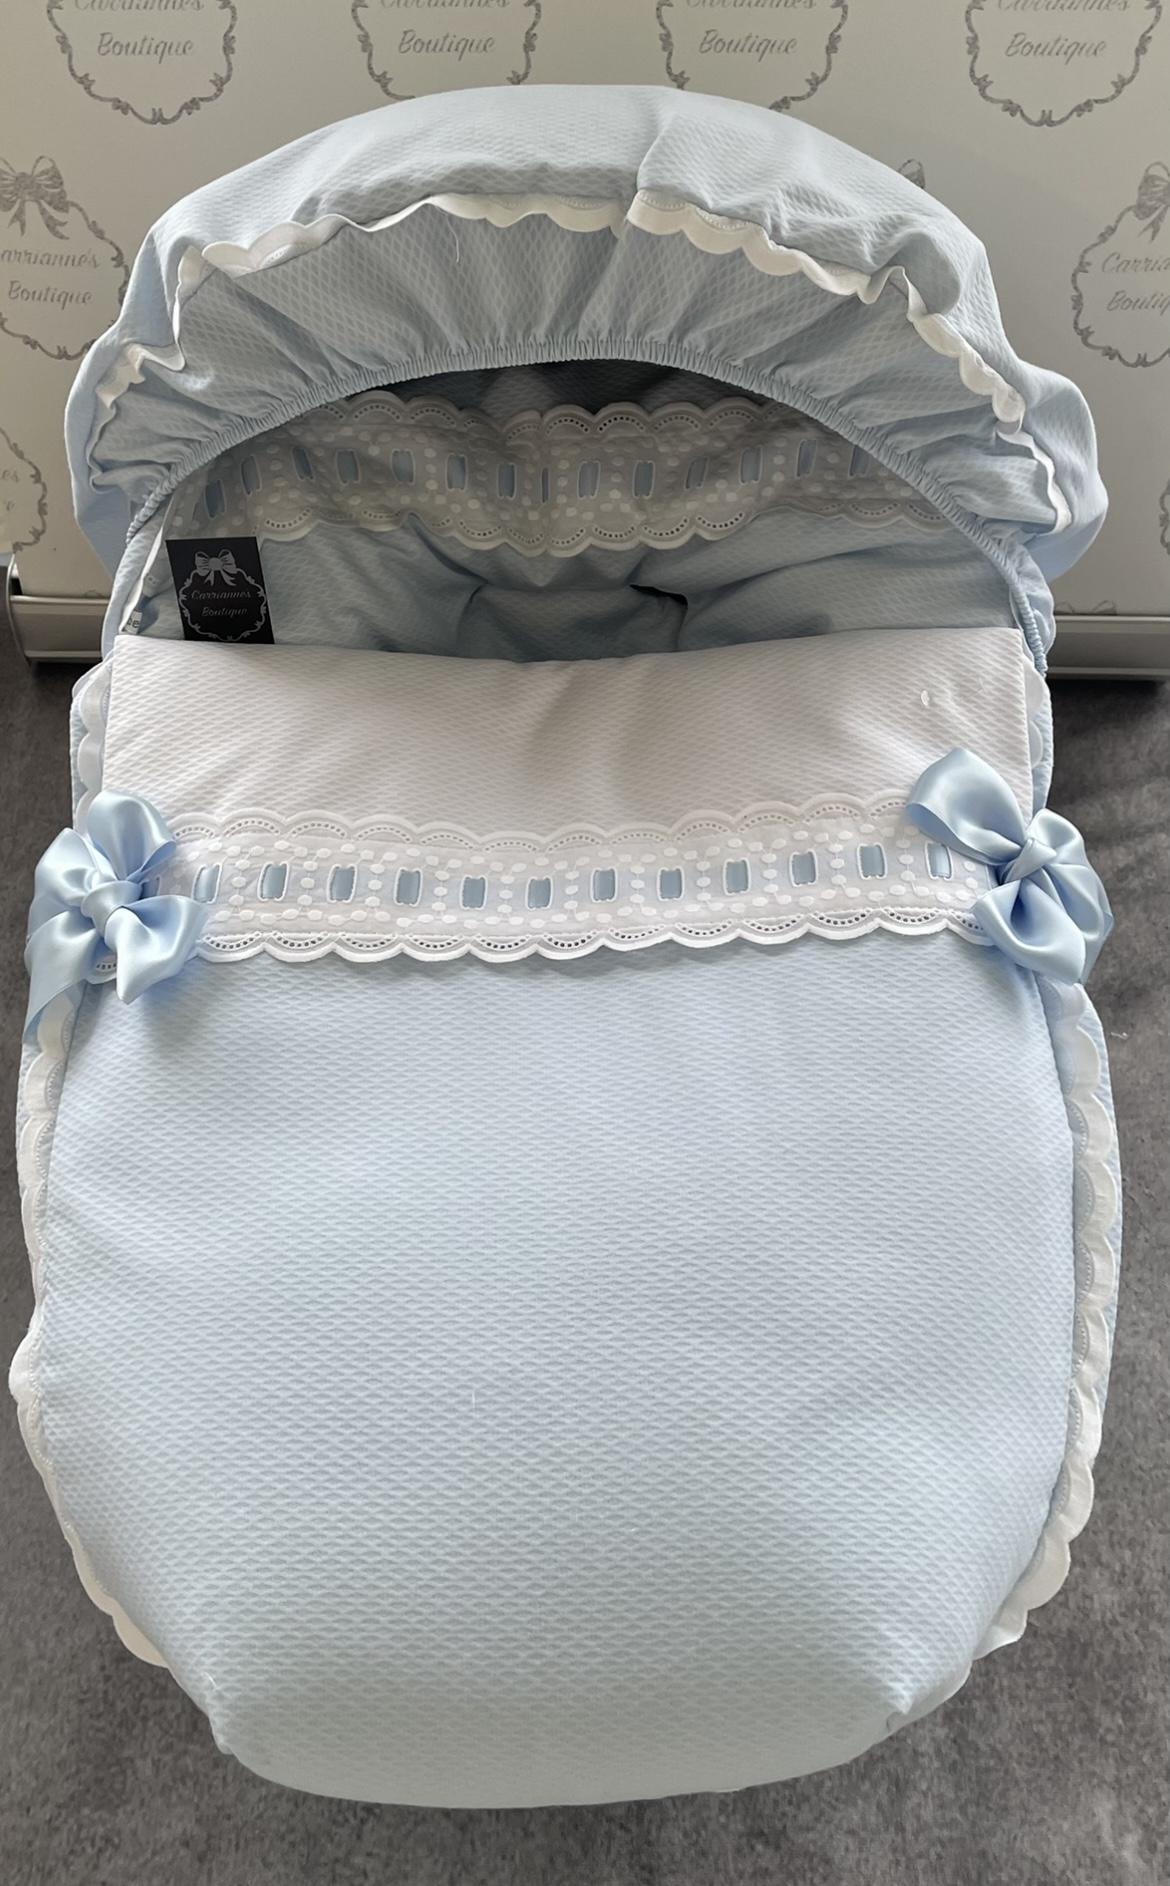 Blue Spanish Car Seat Cosy Foot Muff - Carrianne's Boutique